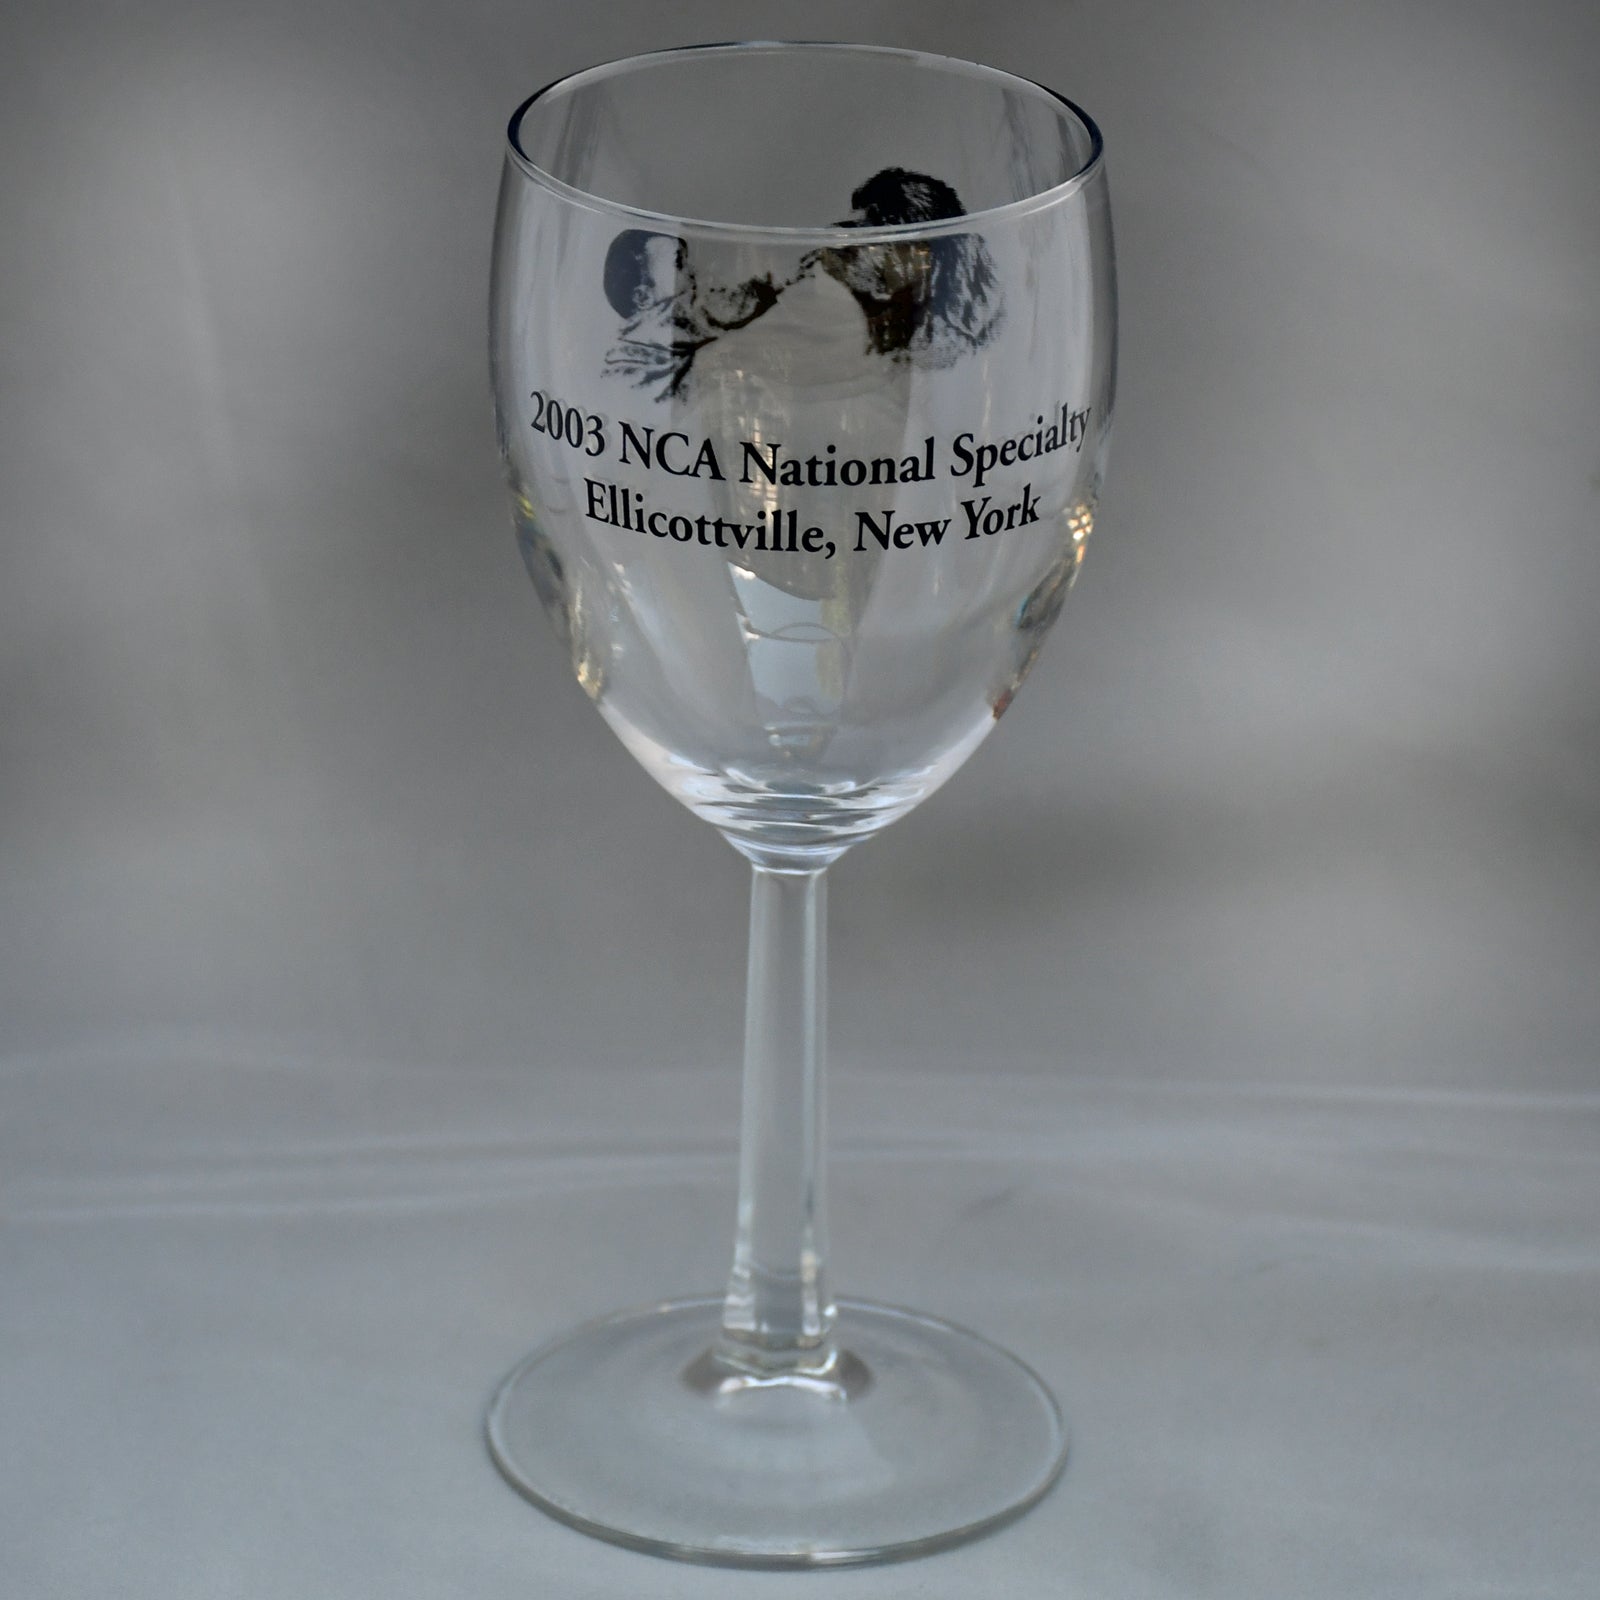 2003 NCA National Specialty Wine Glass